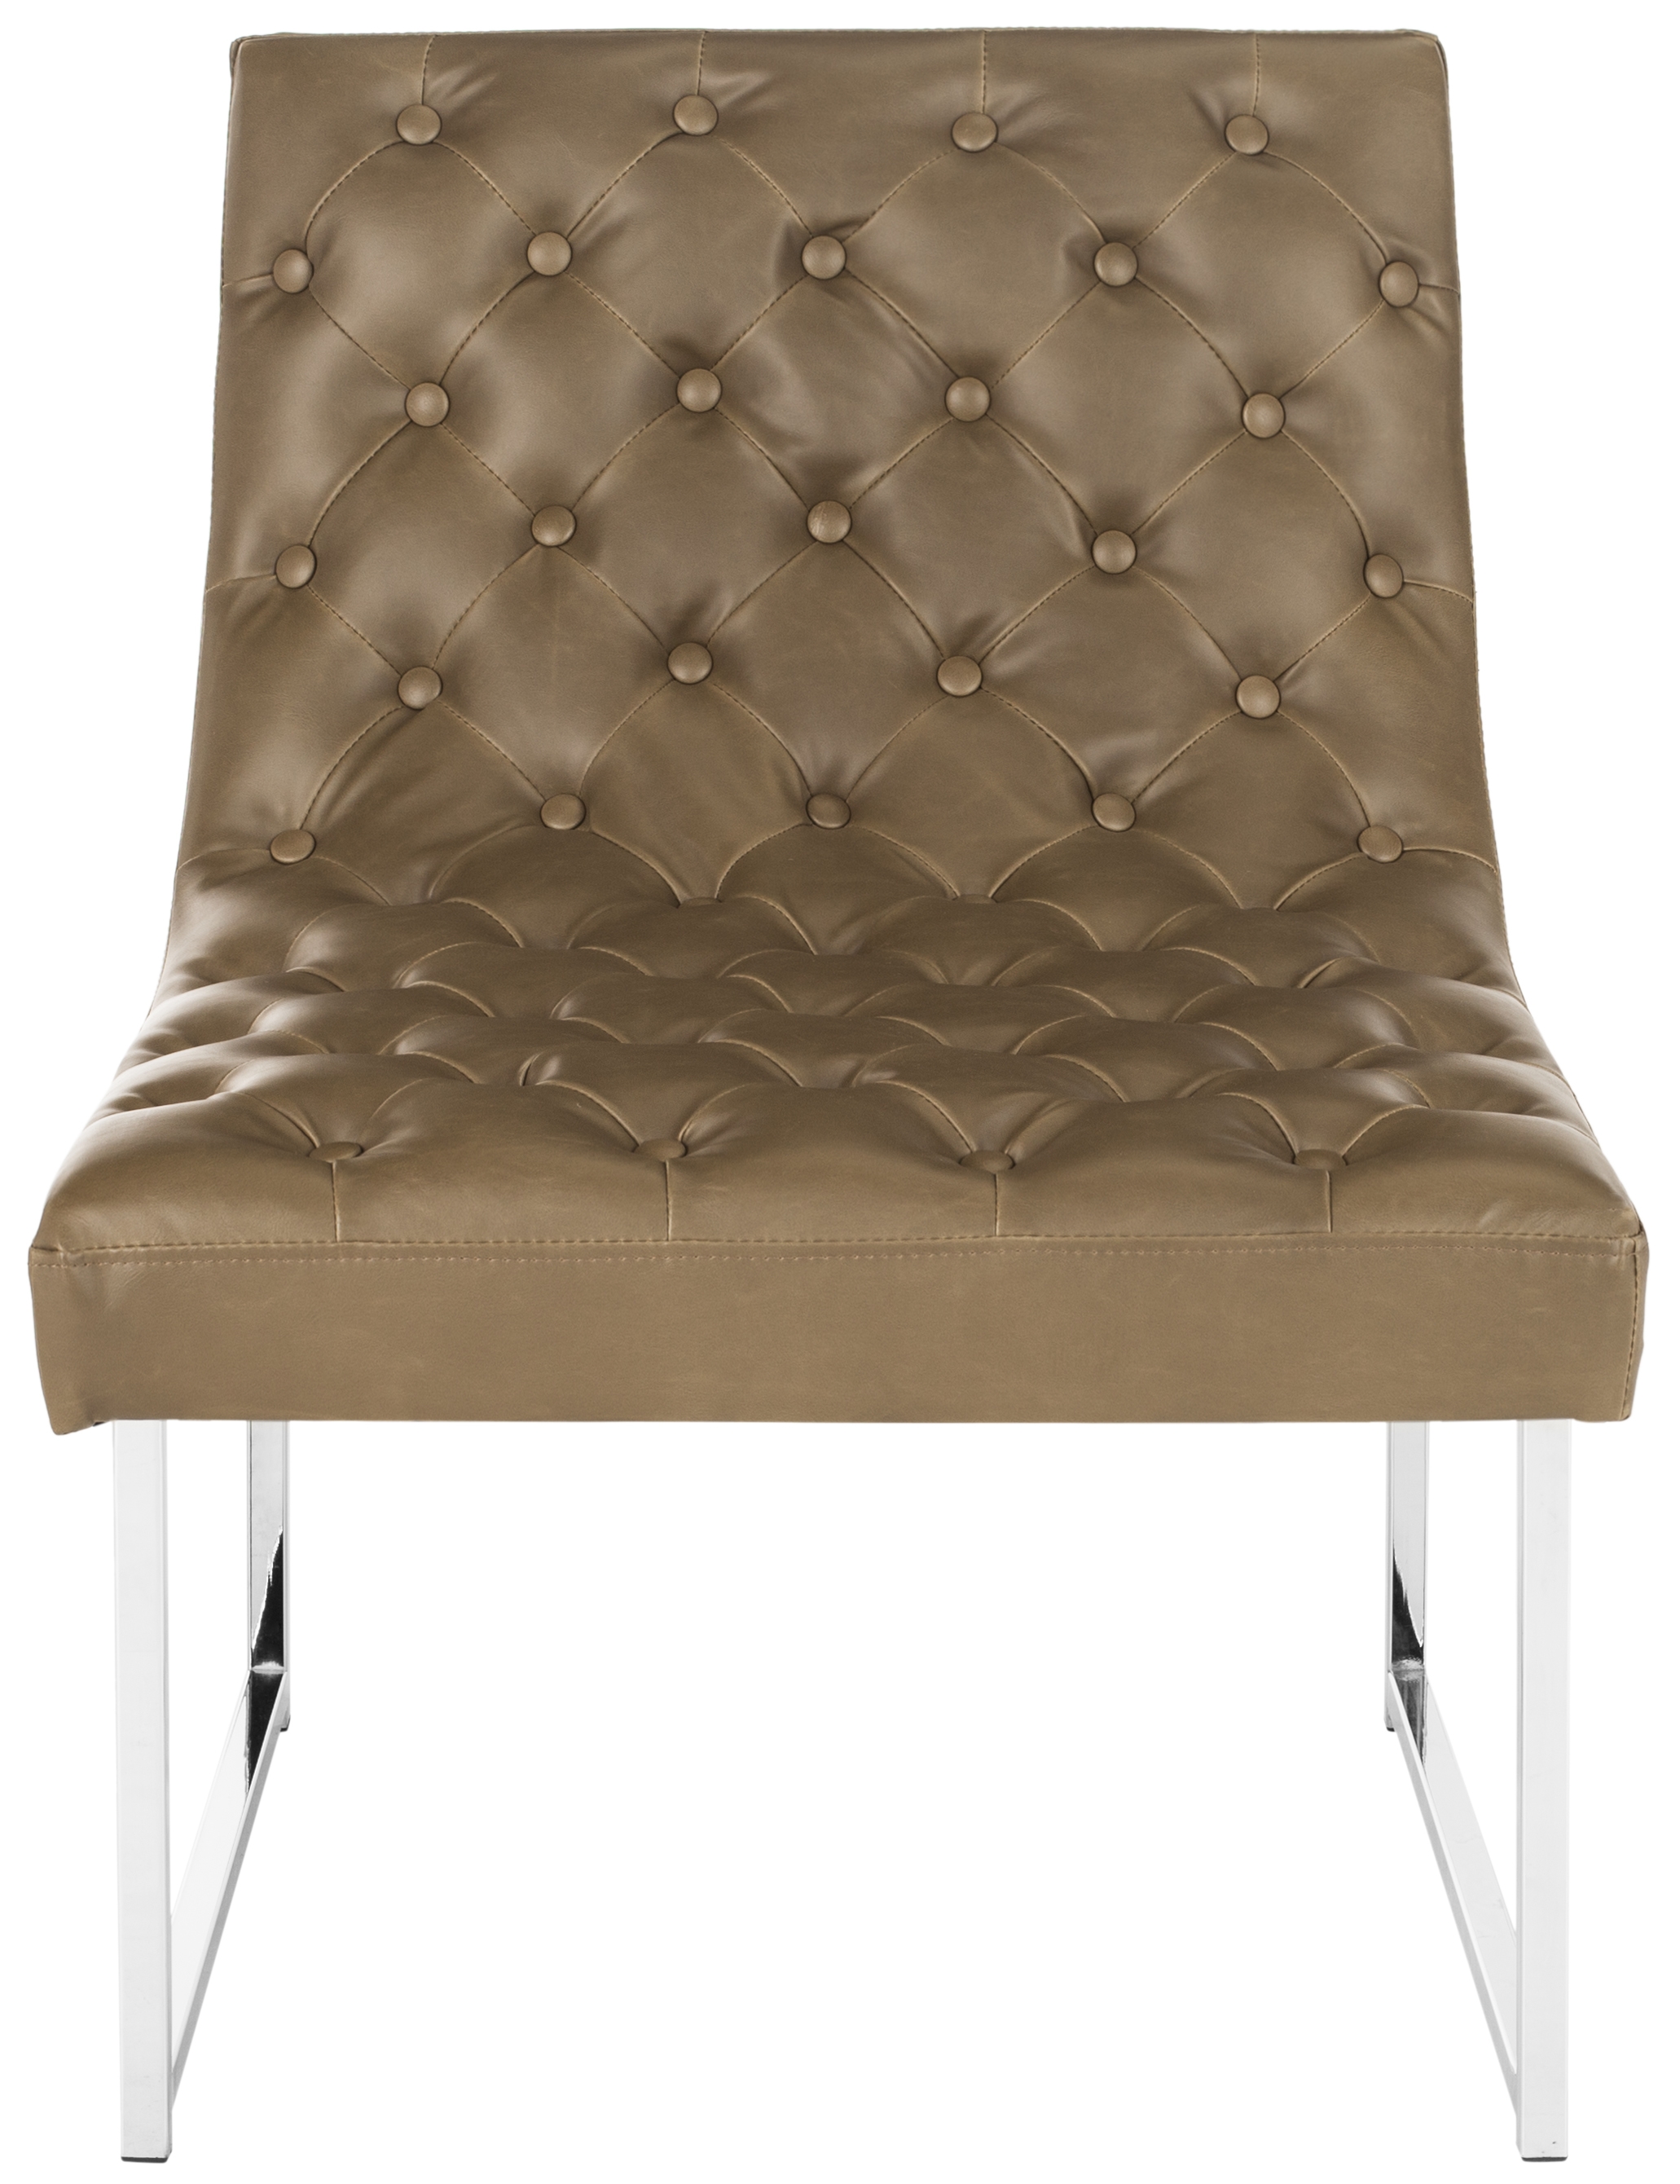 Hadley Leather Tufted Accent Chair - Antique Taupe - Arlo Home - Image 0